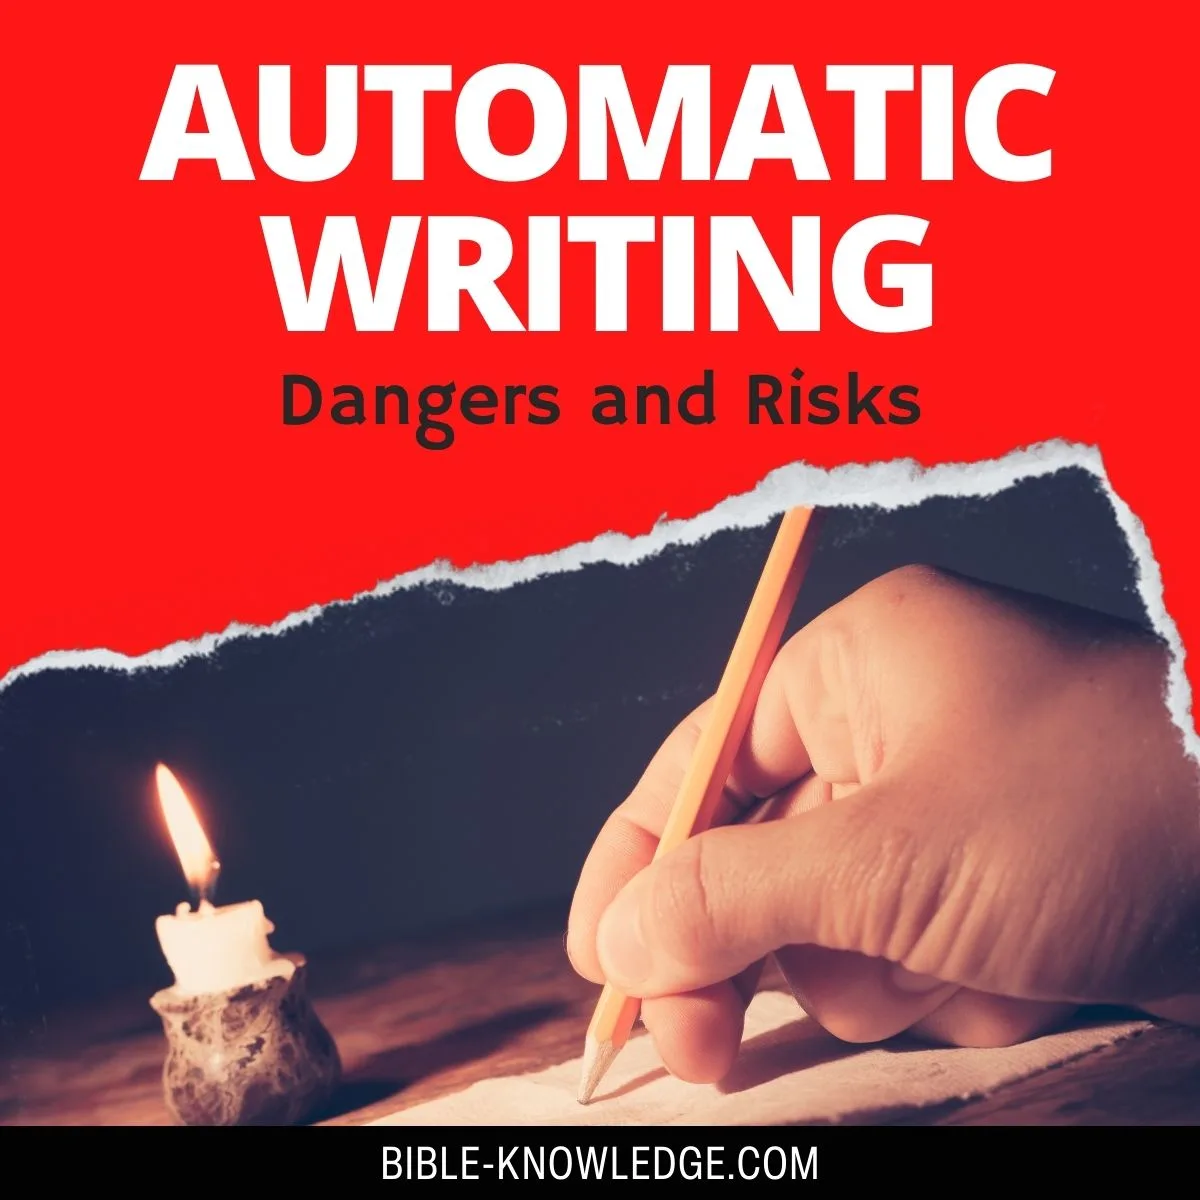 The Dangers of Automatic Writing